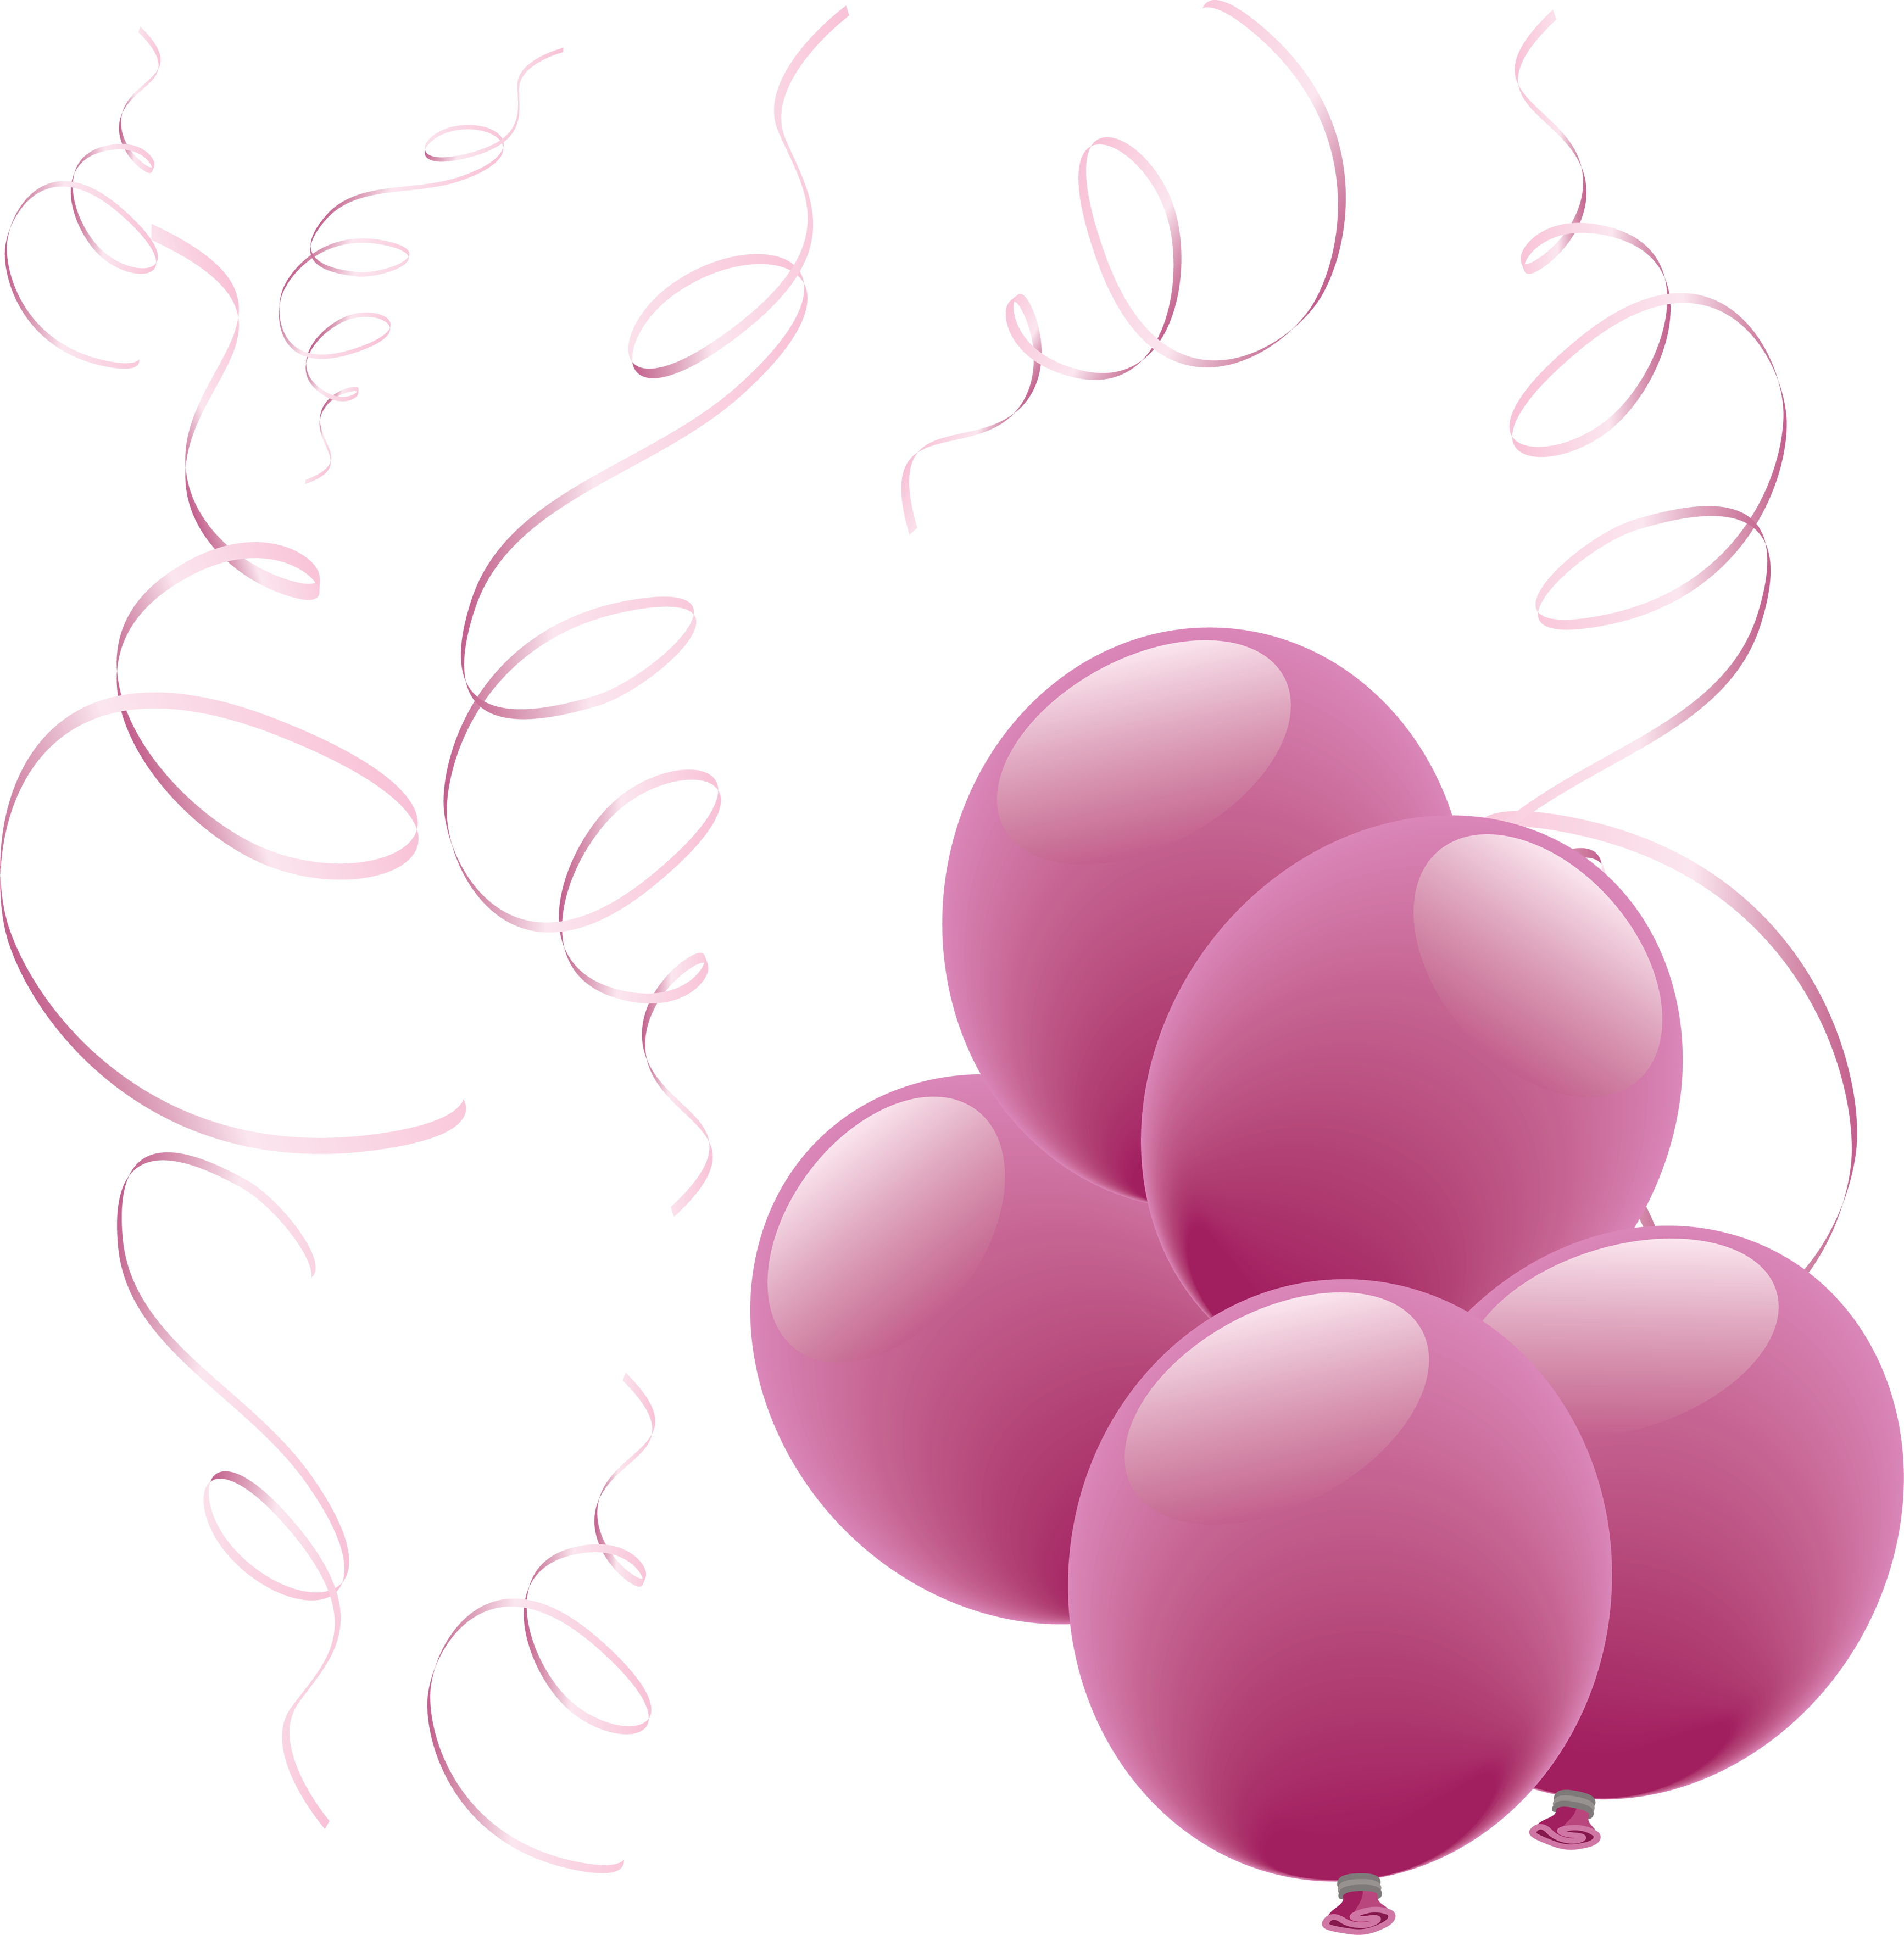 Purple Balloons Png Image   Purple Balloons Png Image